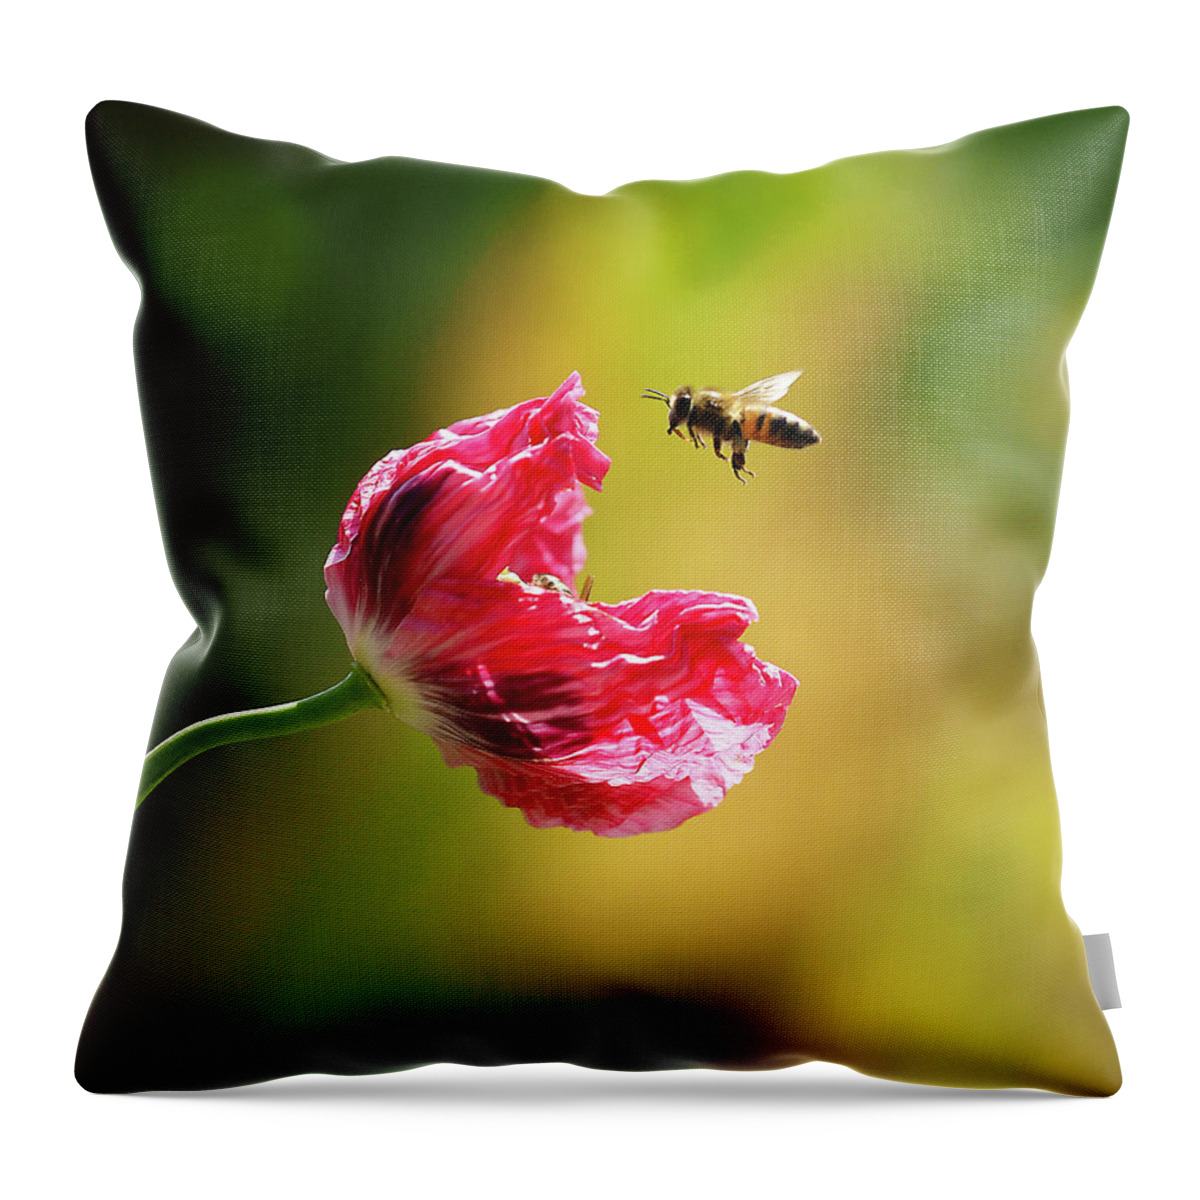 Bee Throw Pillow featuring the photograph Got Bees In Me Opium Poppies by Joe Schofield